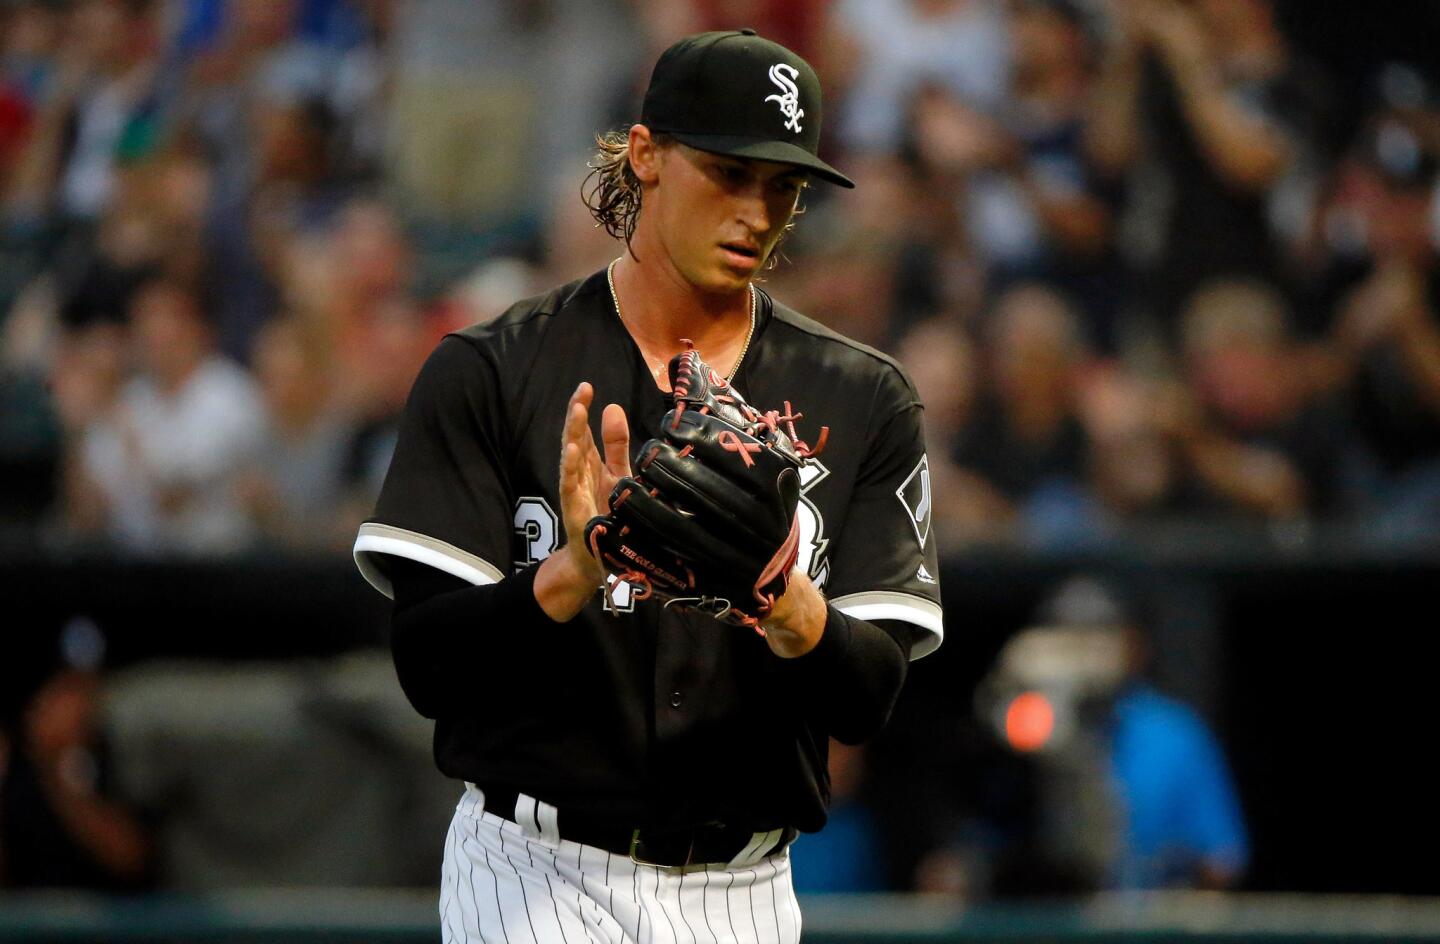 Michael Kopech reacts at the end of the first inning against the Twins at Guaranteed Rate Field on Aug. 21, 2018.